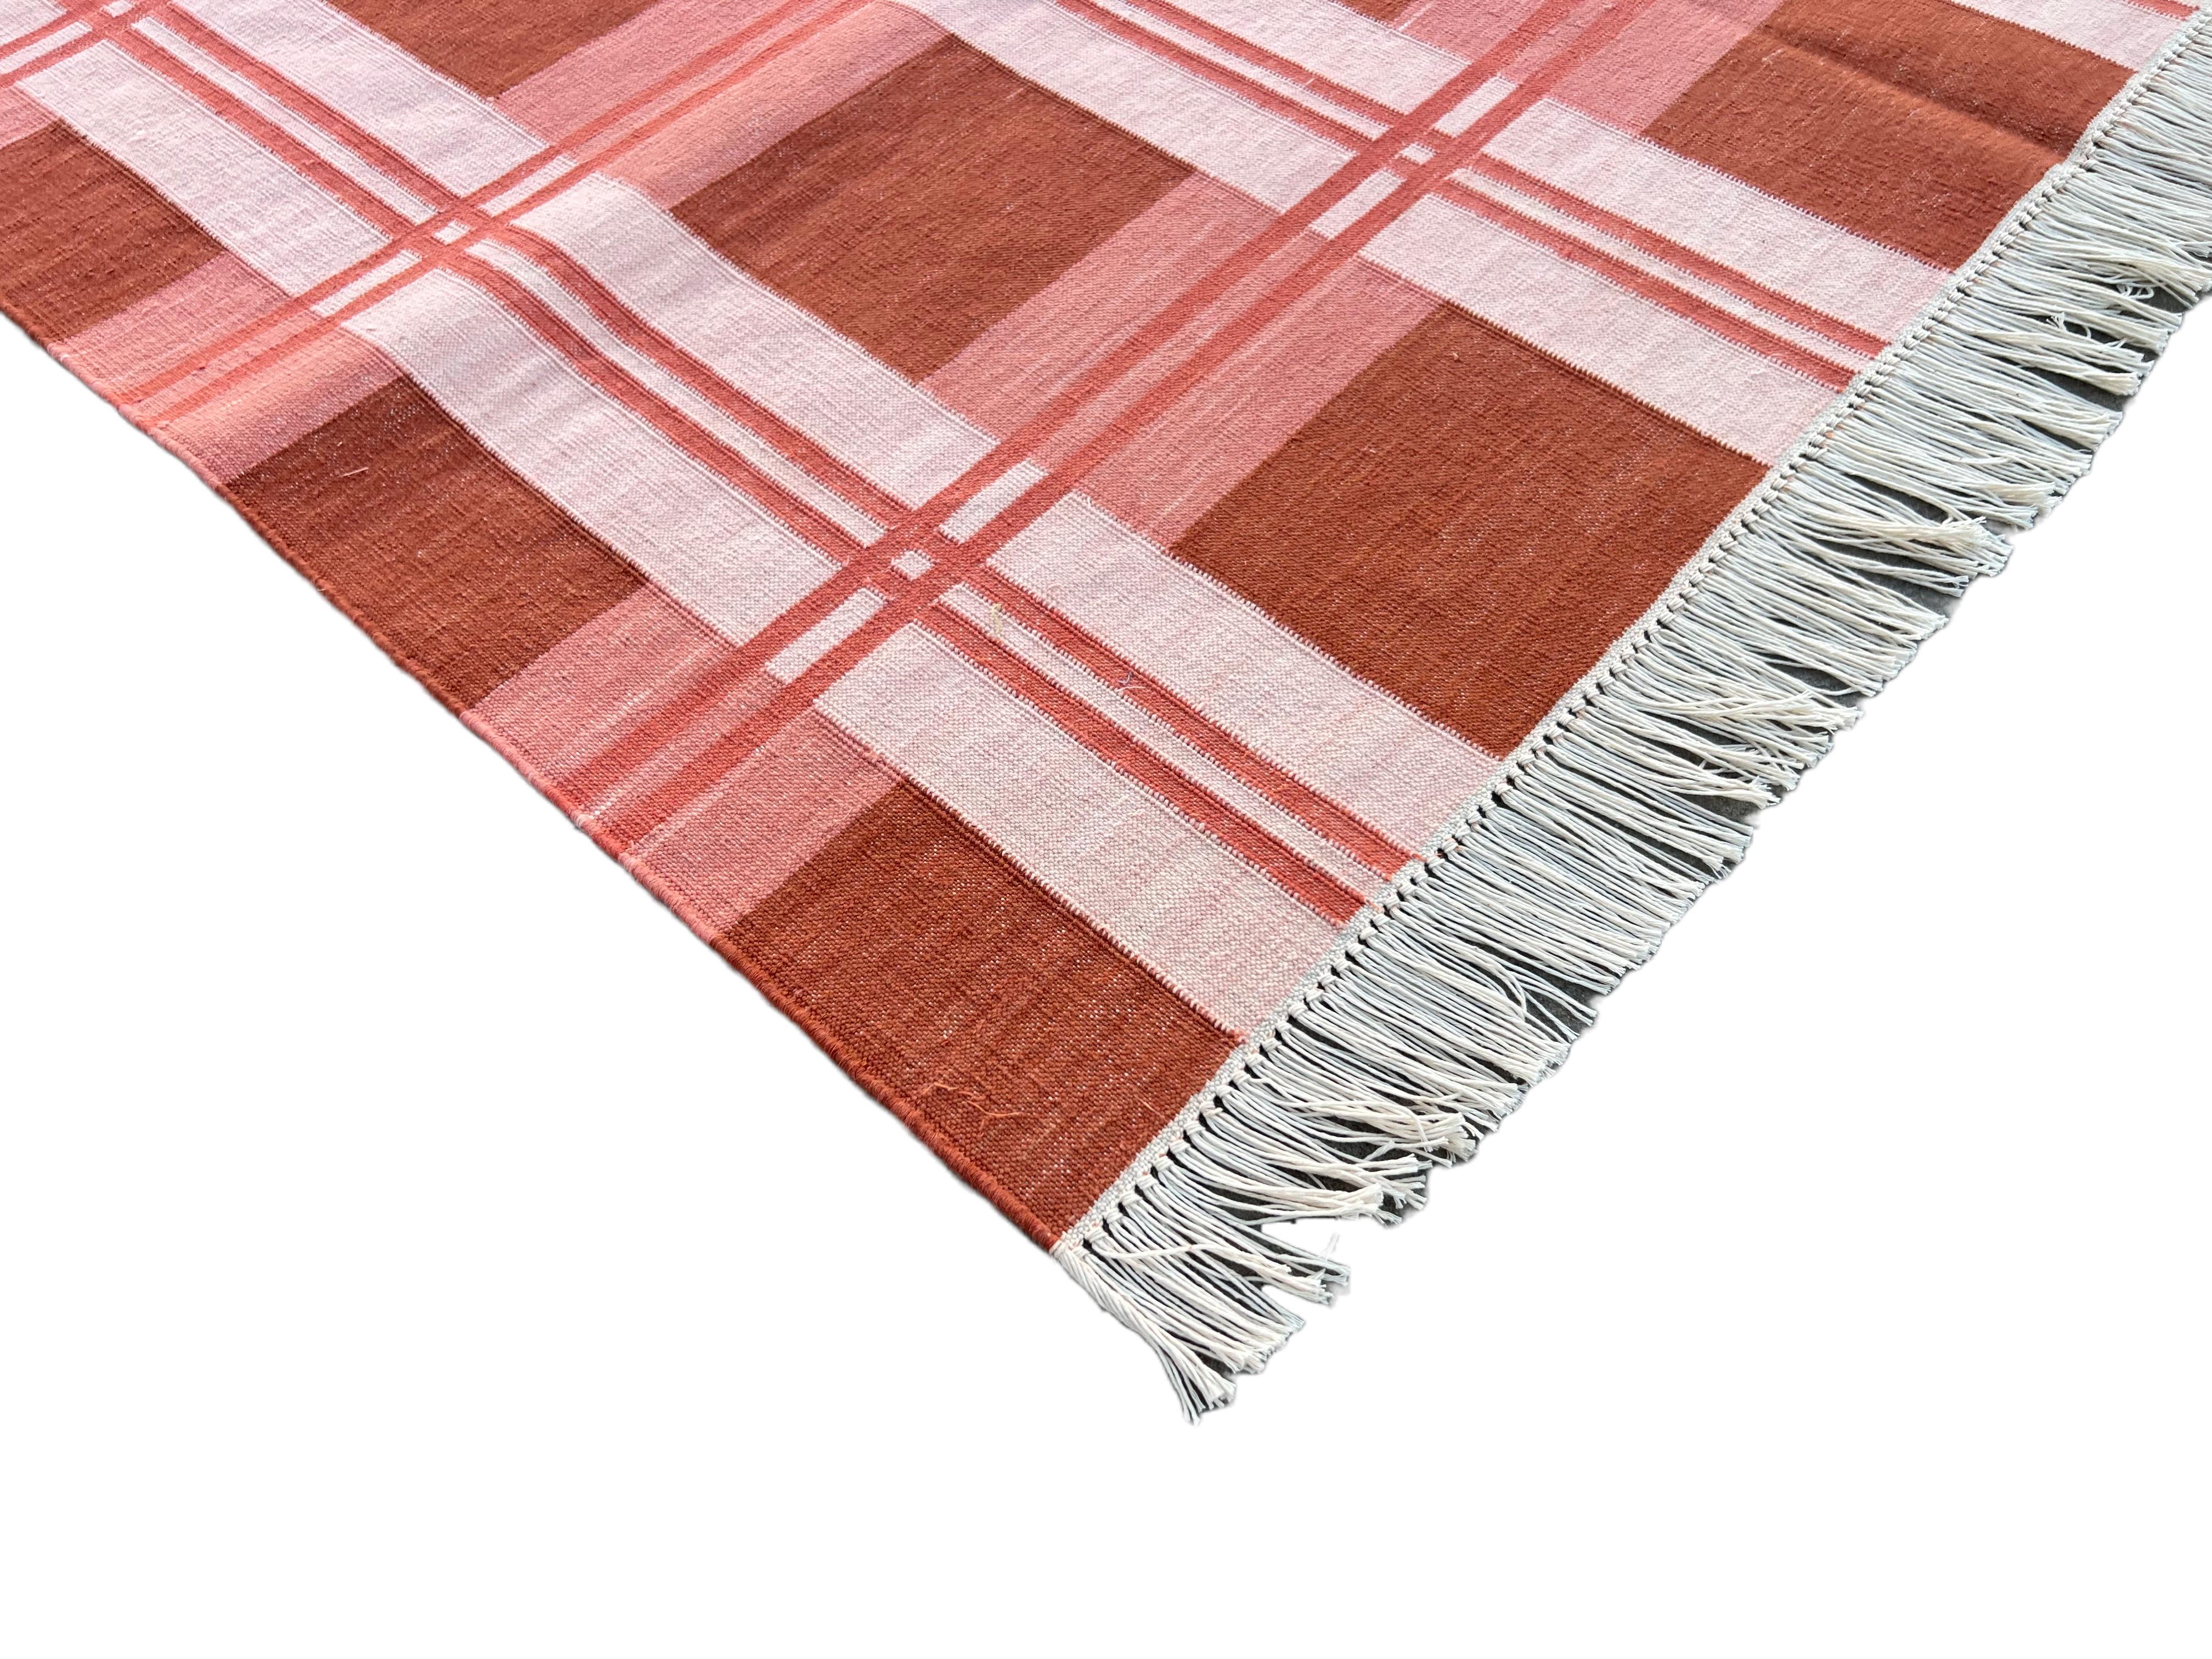 Cotton Vegetable Dyed Red and Pick Checked Indian Dhurrie Rug-4'x6' 

These special flat-weave dhurries are hand-woven with 15 ply 100% cotton yarn. Due to the special manufacturing techniques used to create our rugs, the size and color of each